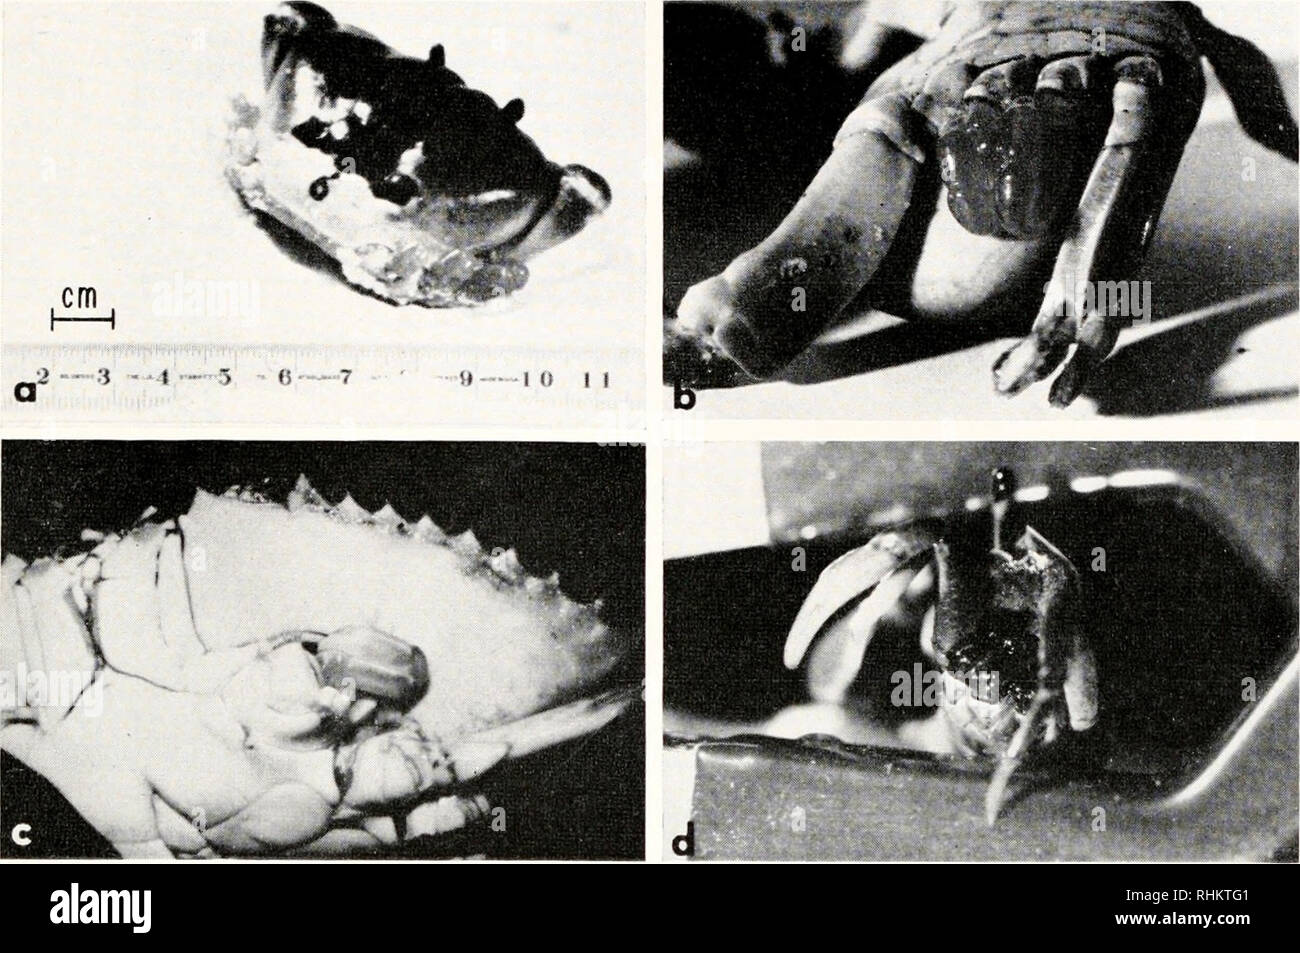 . The Biological bulletin. Biology; Zoology; Biology; Marine Biology. ECDYSES STIMULATED BY LIMB LOSS 225. FIGURE 1. Specimens of crabs with regenerating limb buds, (a, b) Gecarcinus latcralis. (c) Callinectes sapidits and (d) L'cu piti/iut.r. Eiglit, 4, 6, and 6 walking legs were removed from animals (a, b) 45, (c) 3o, and (d) 20 days previous to the time of photography. normal. We have performed a series of experiments on (.iecarcnnis to compare the relative effectiveness of eyestalk extirpation and limh loss in inducing pre- cocious molts. We find that eyestalk removal leads to the most rap Stock Photo